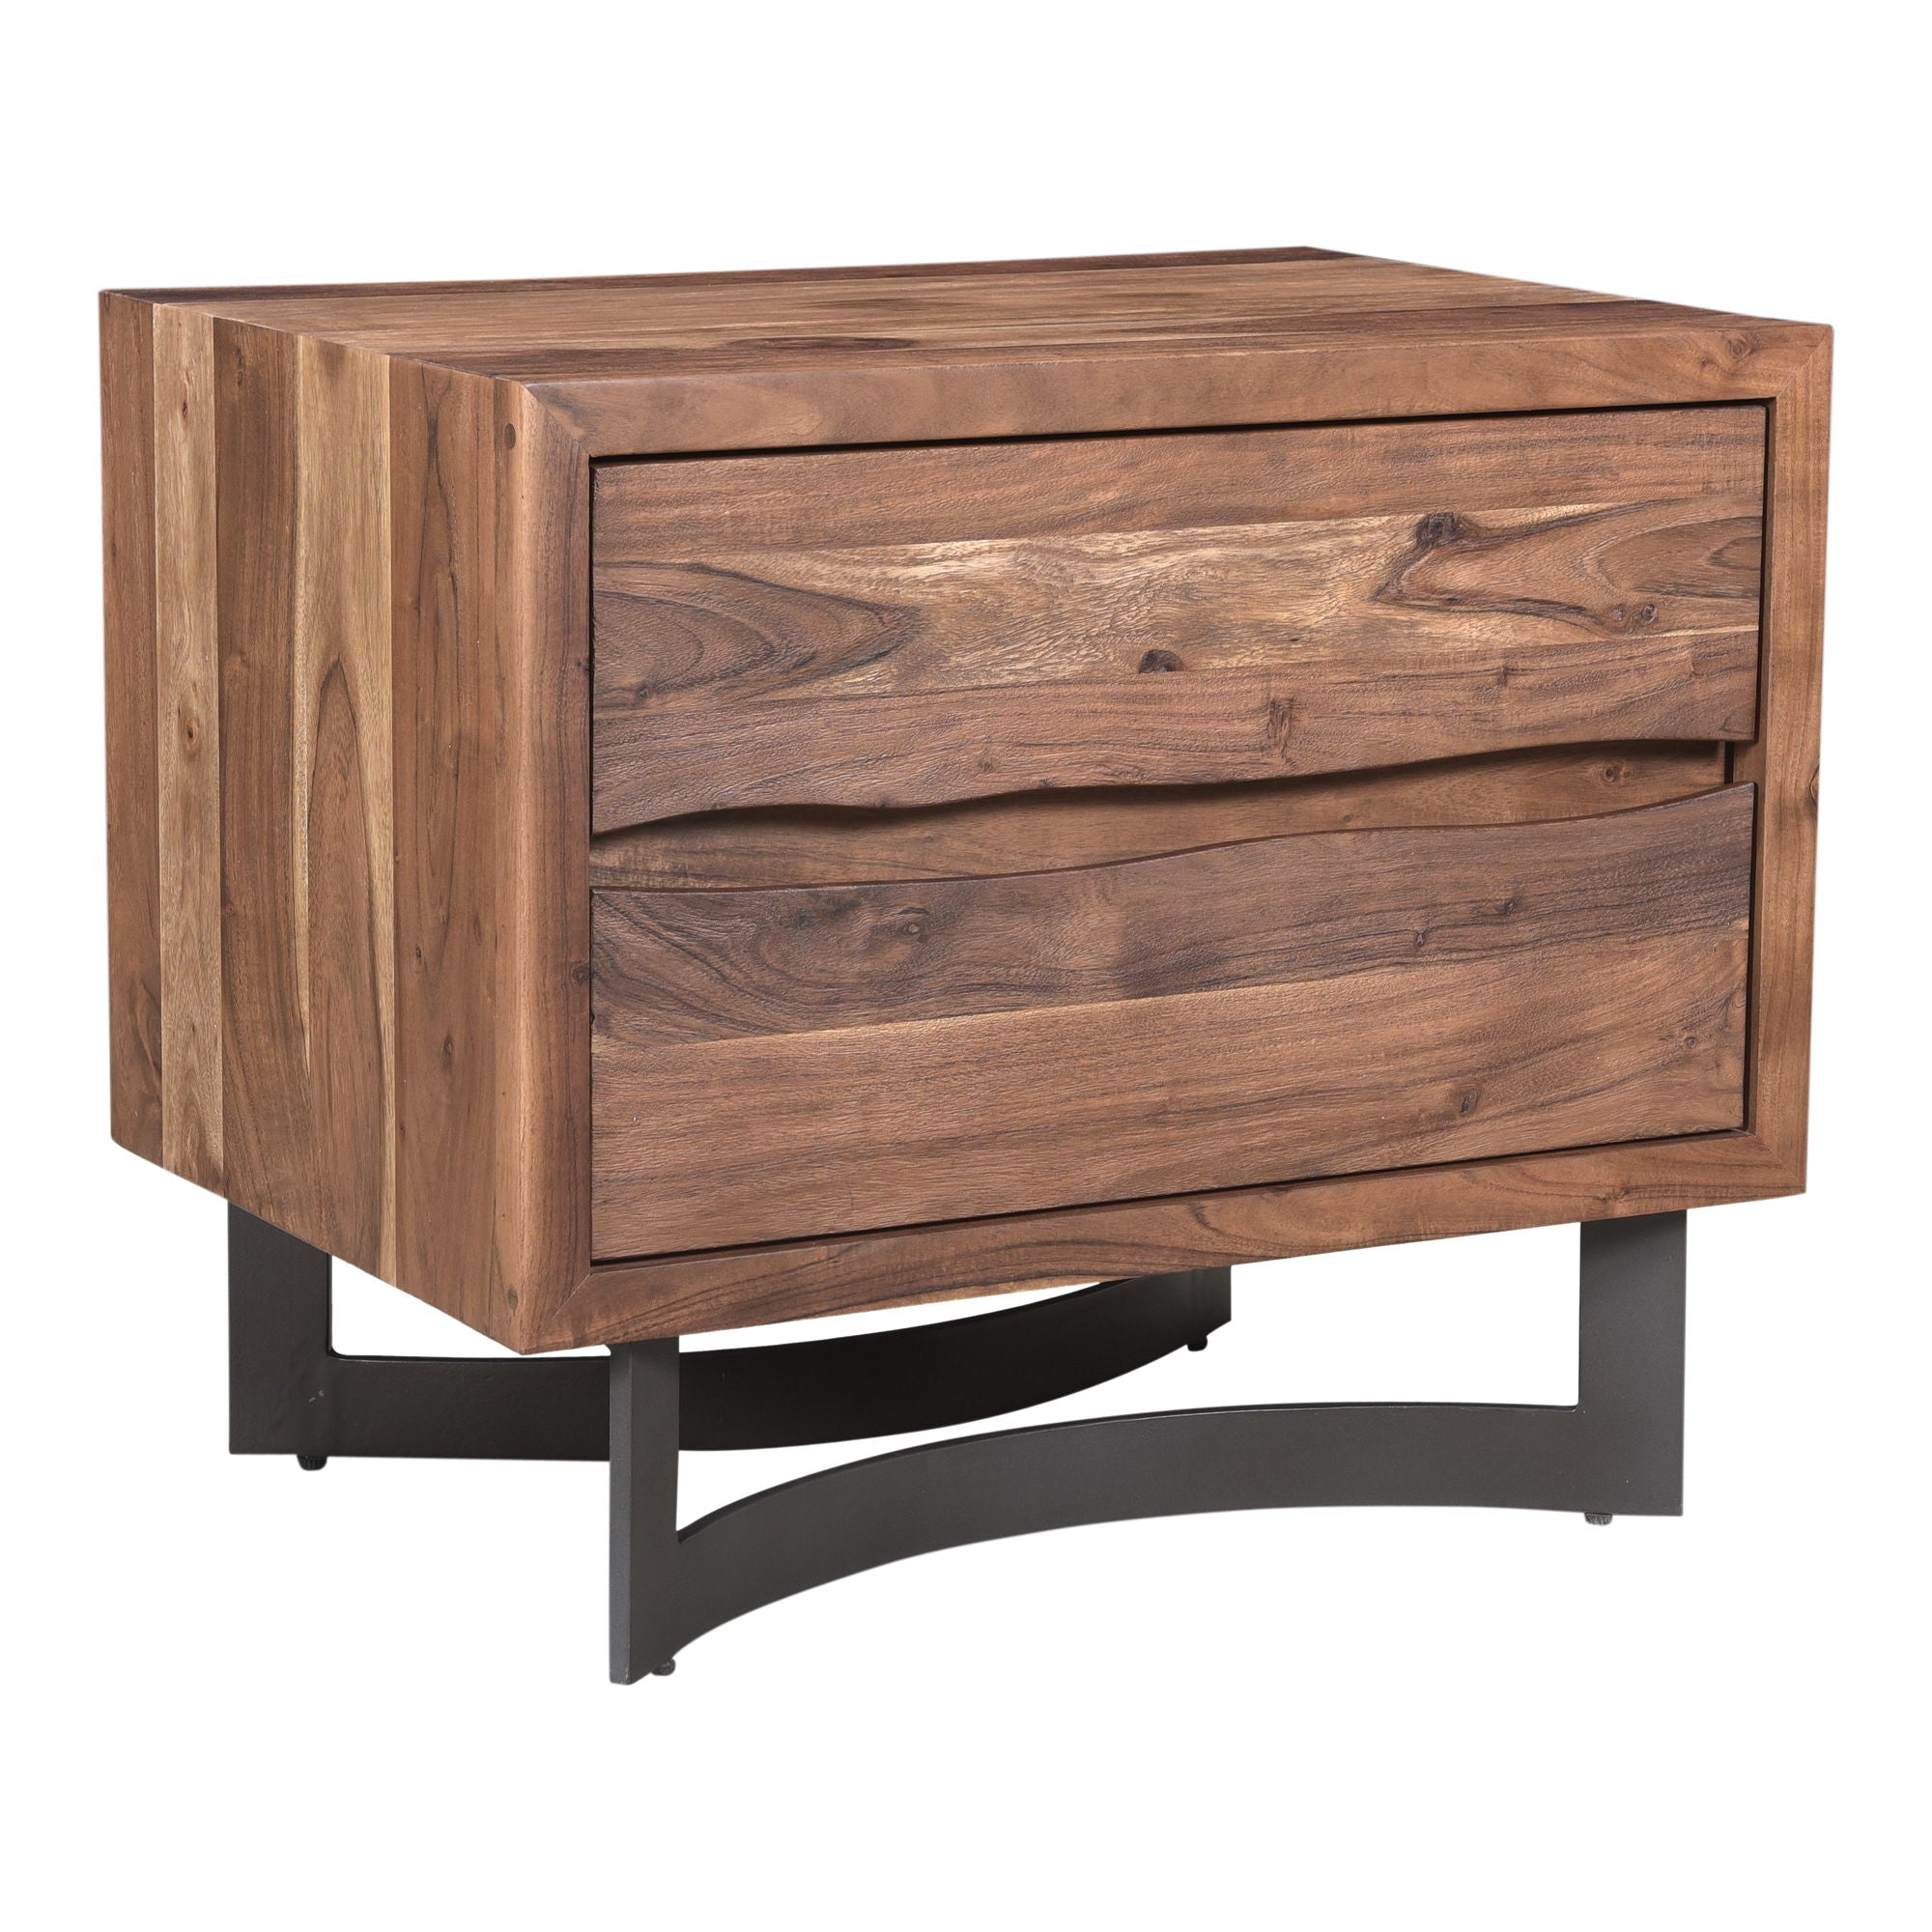 Bent - Nightstand - Natural Stain